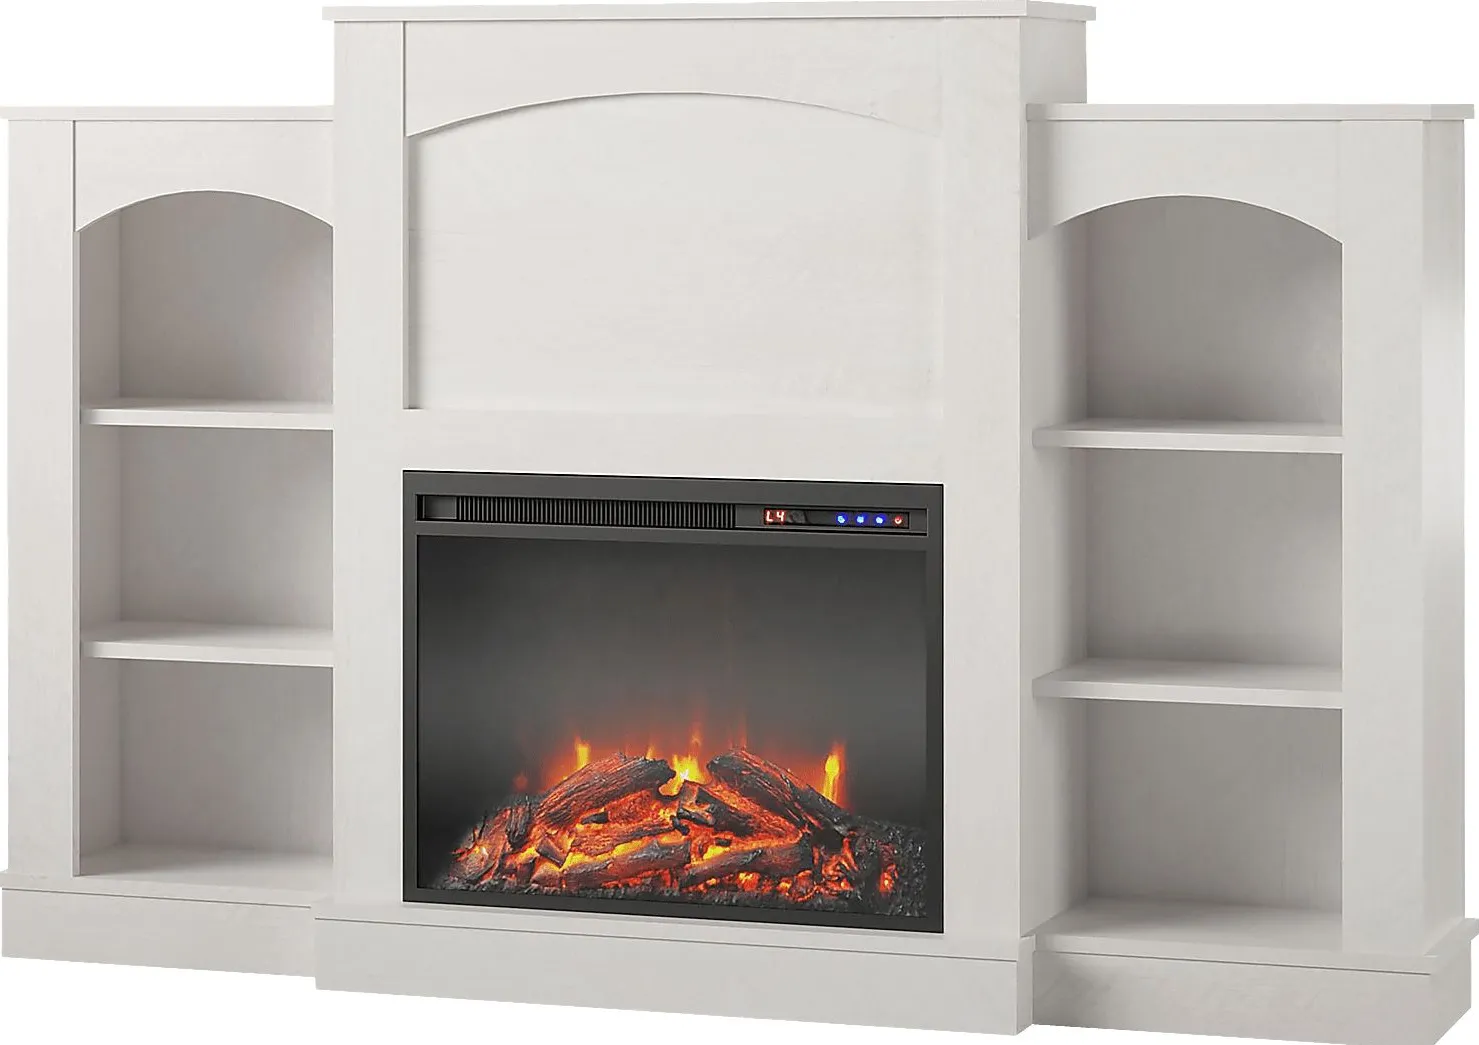 Alarice Ivory 61 in. Console with Electric Fireplace